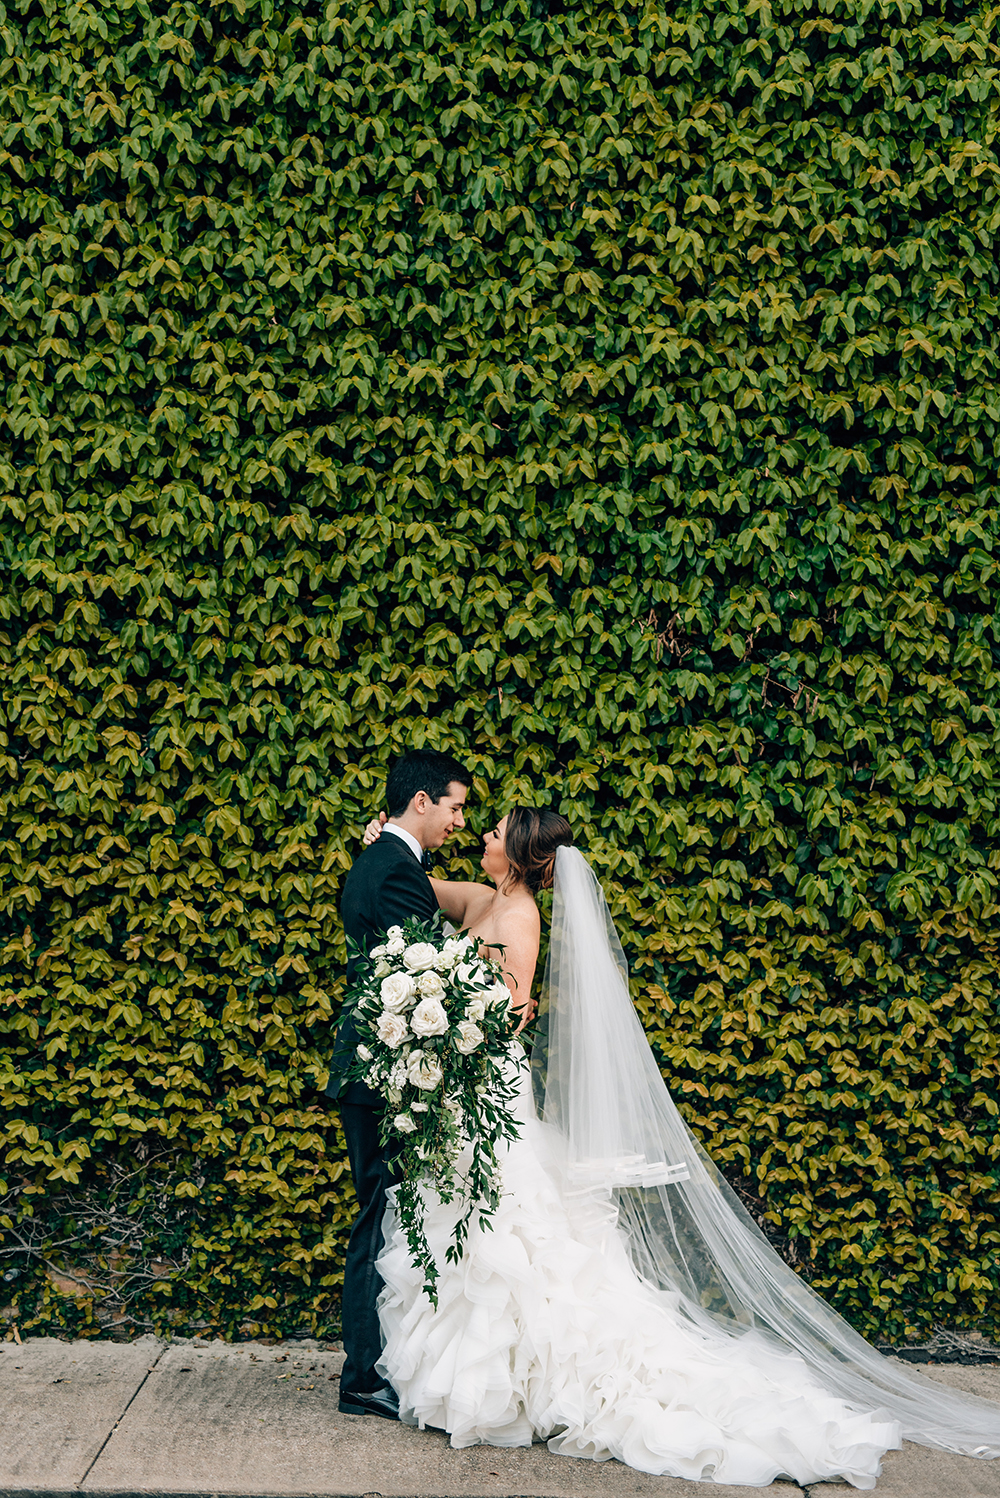 outdoor ceremony venue, houston, the gallery, ivy wall, gorgeous, wedding photos, green